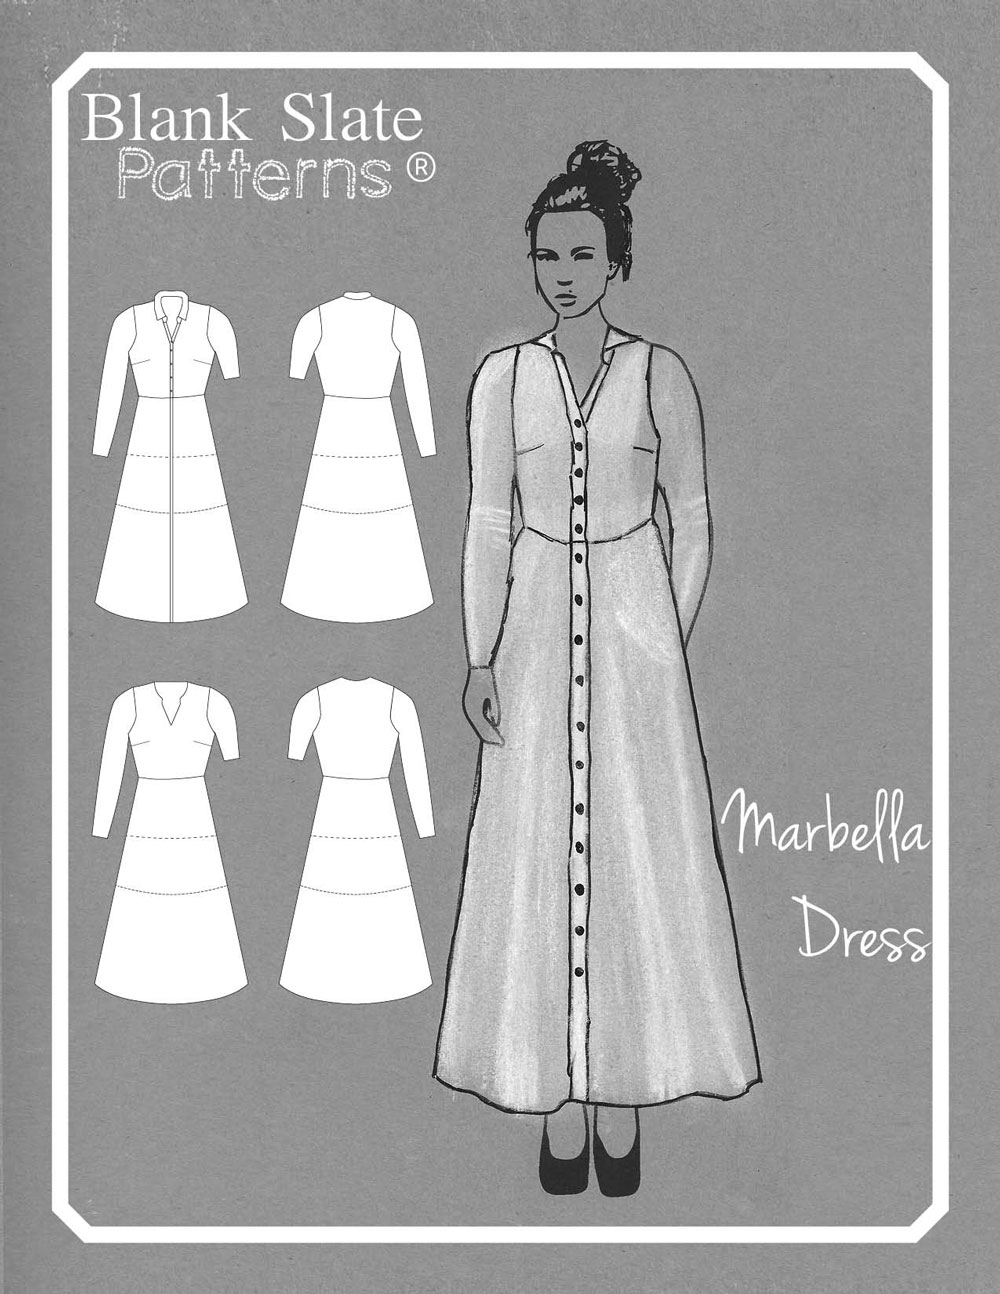 Line Drawing -Marbella Dress by Blank Slate Patterns - Knit Dress Sewing Pattern with 2 bodice, 2 sleeve and 3 length options